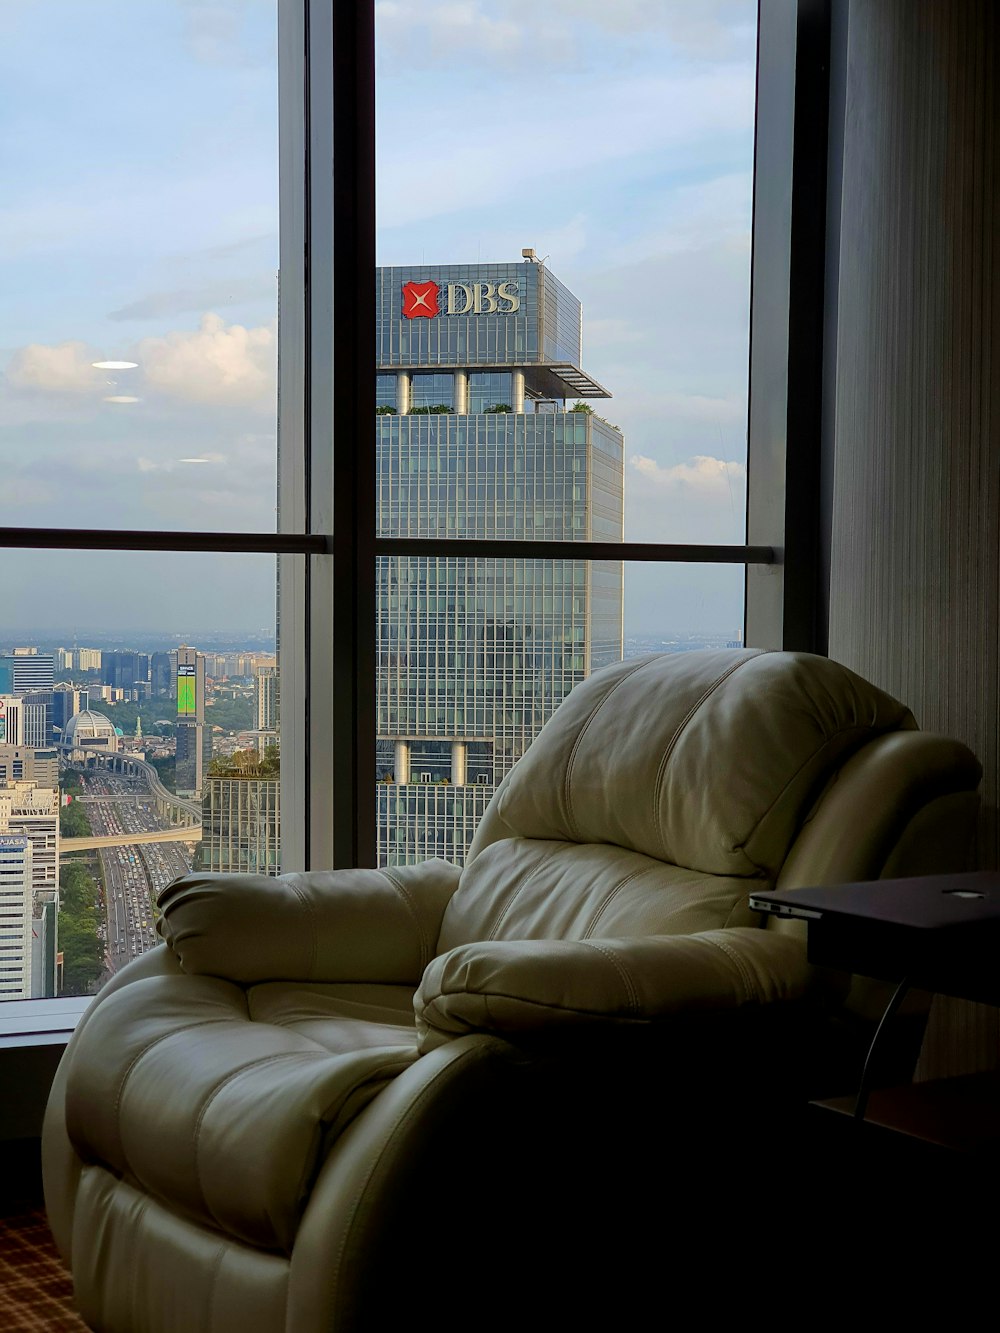 a recliner chair in front of a window overlooking a city